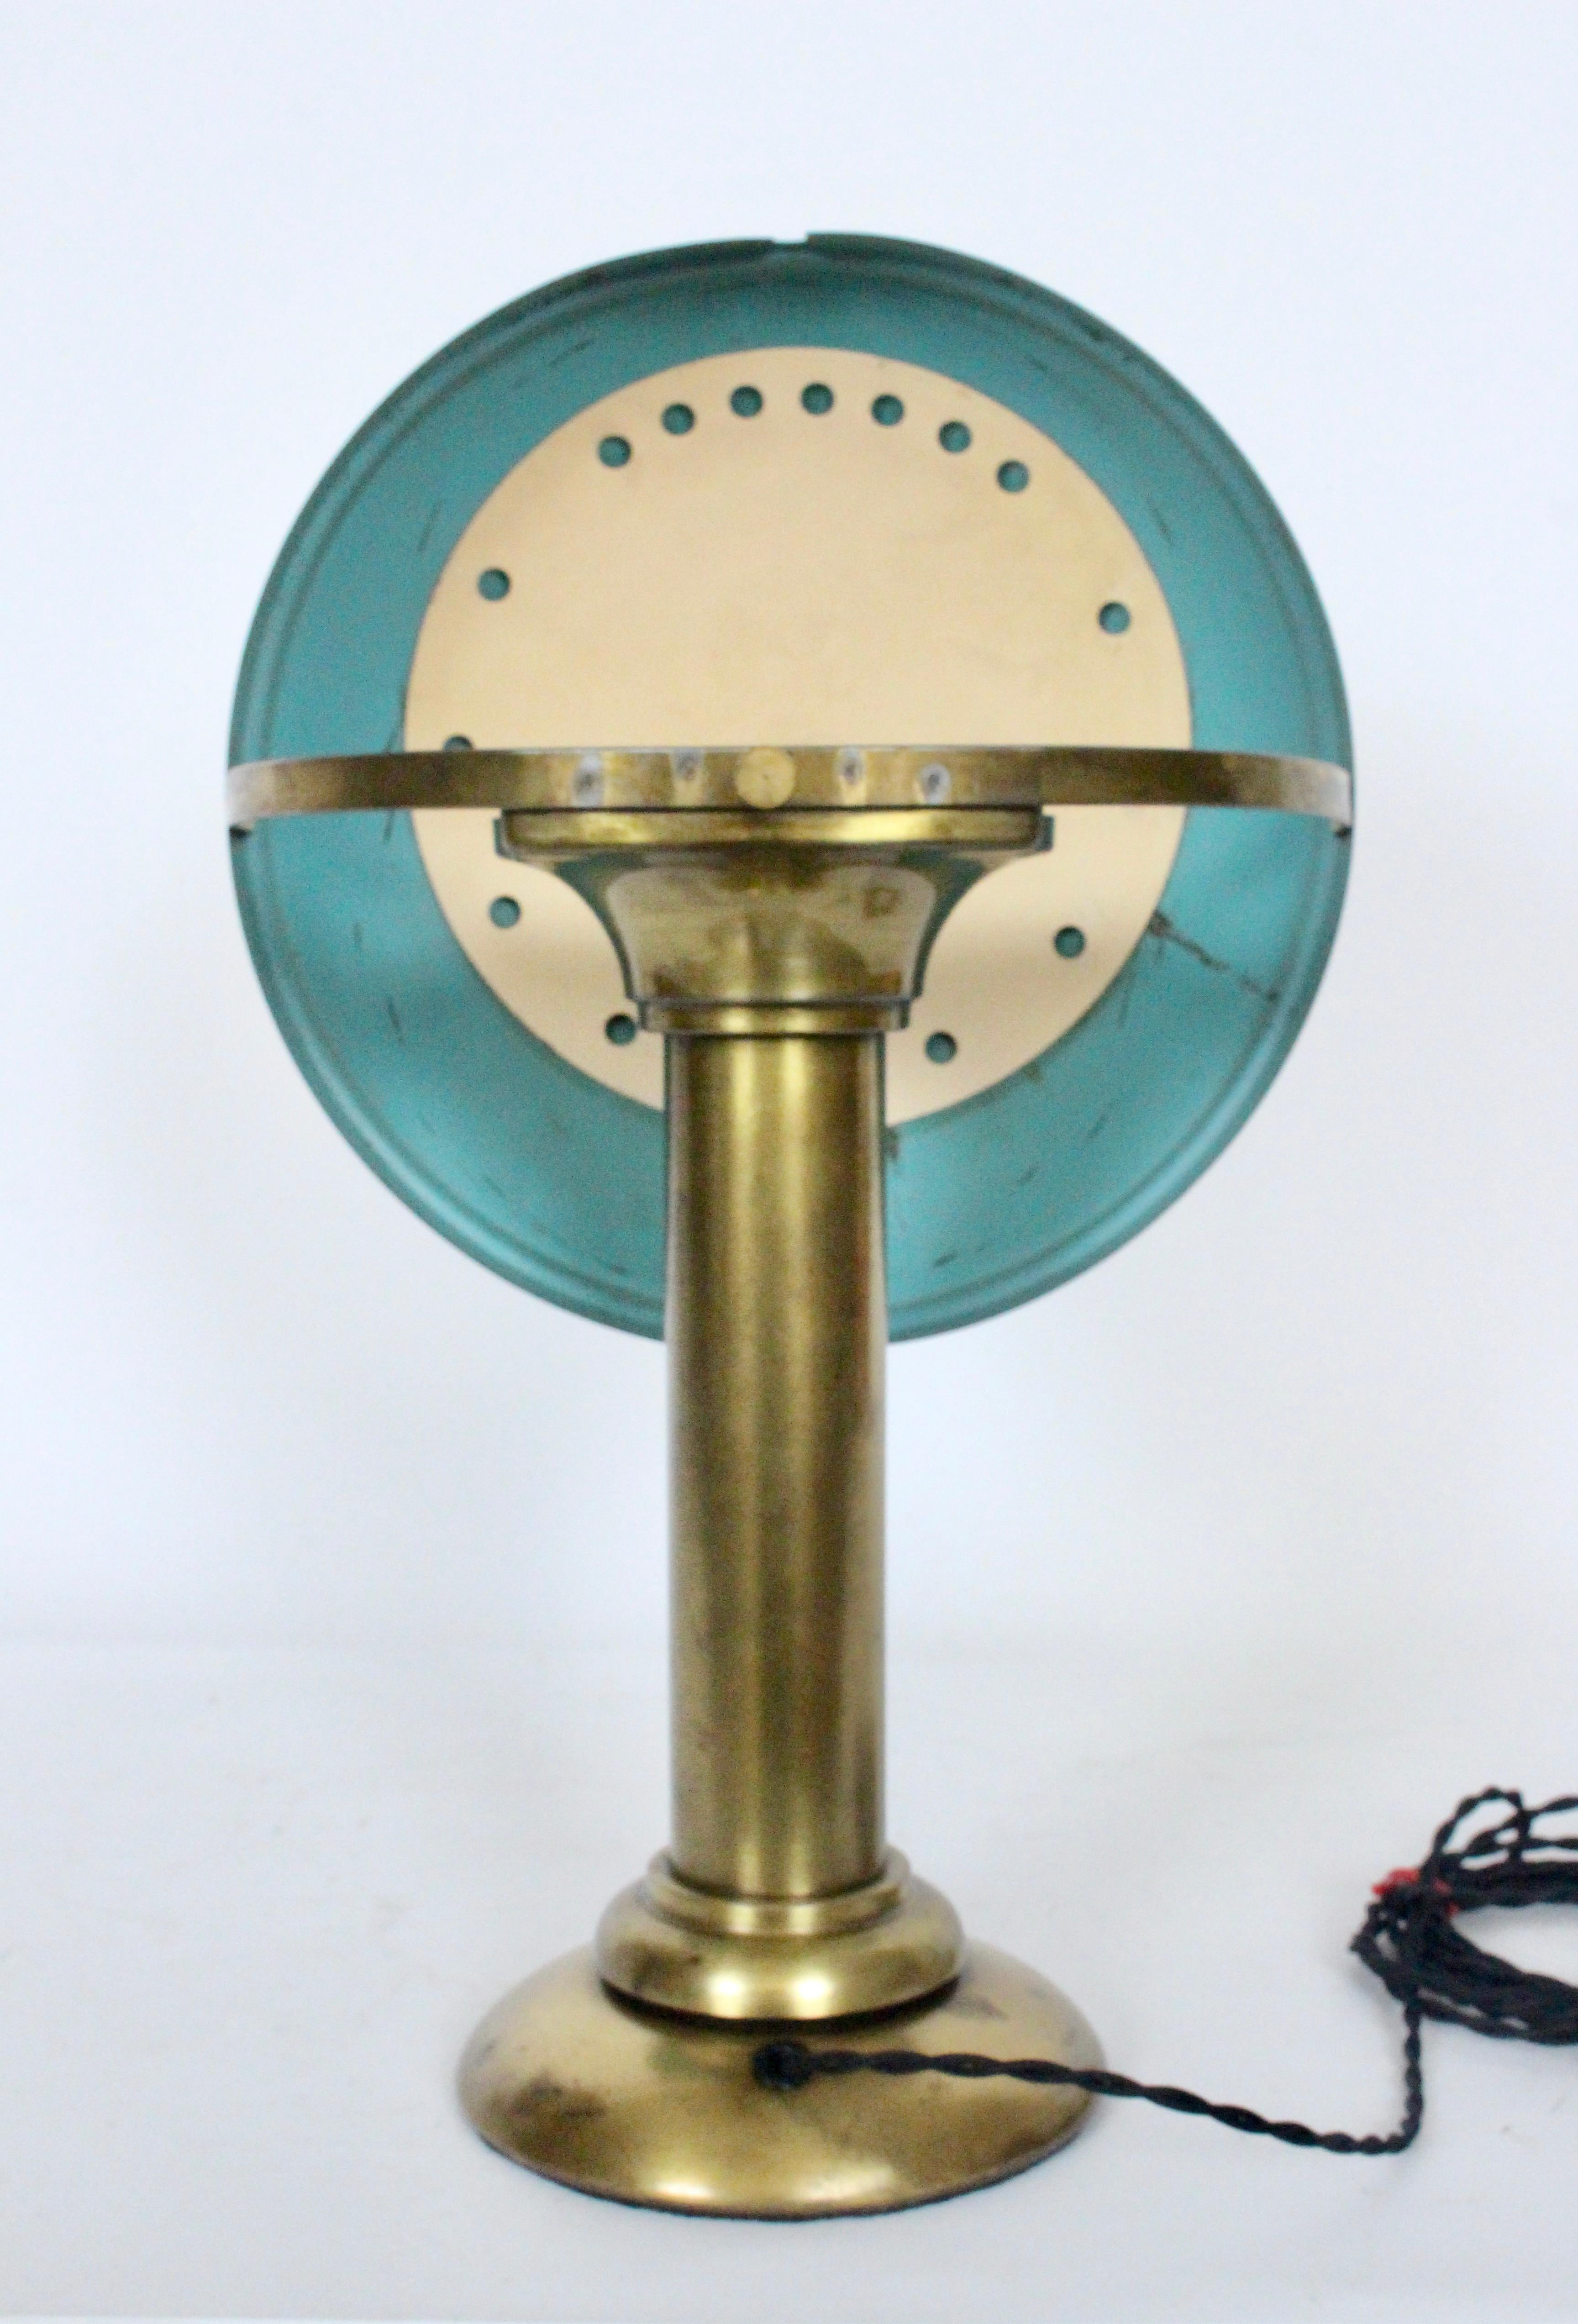 Fairies Mfg. Co. Cantilever All Brass Shaded Desk Lamp, 1920s For Sale 6